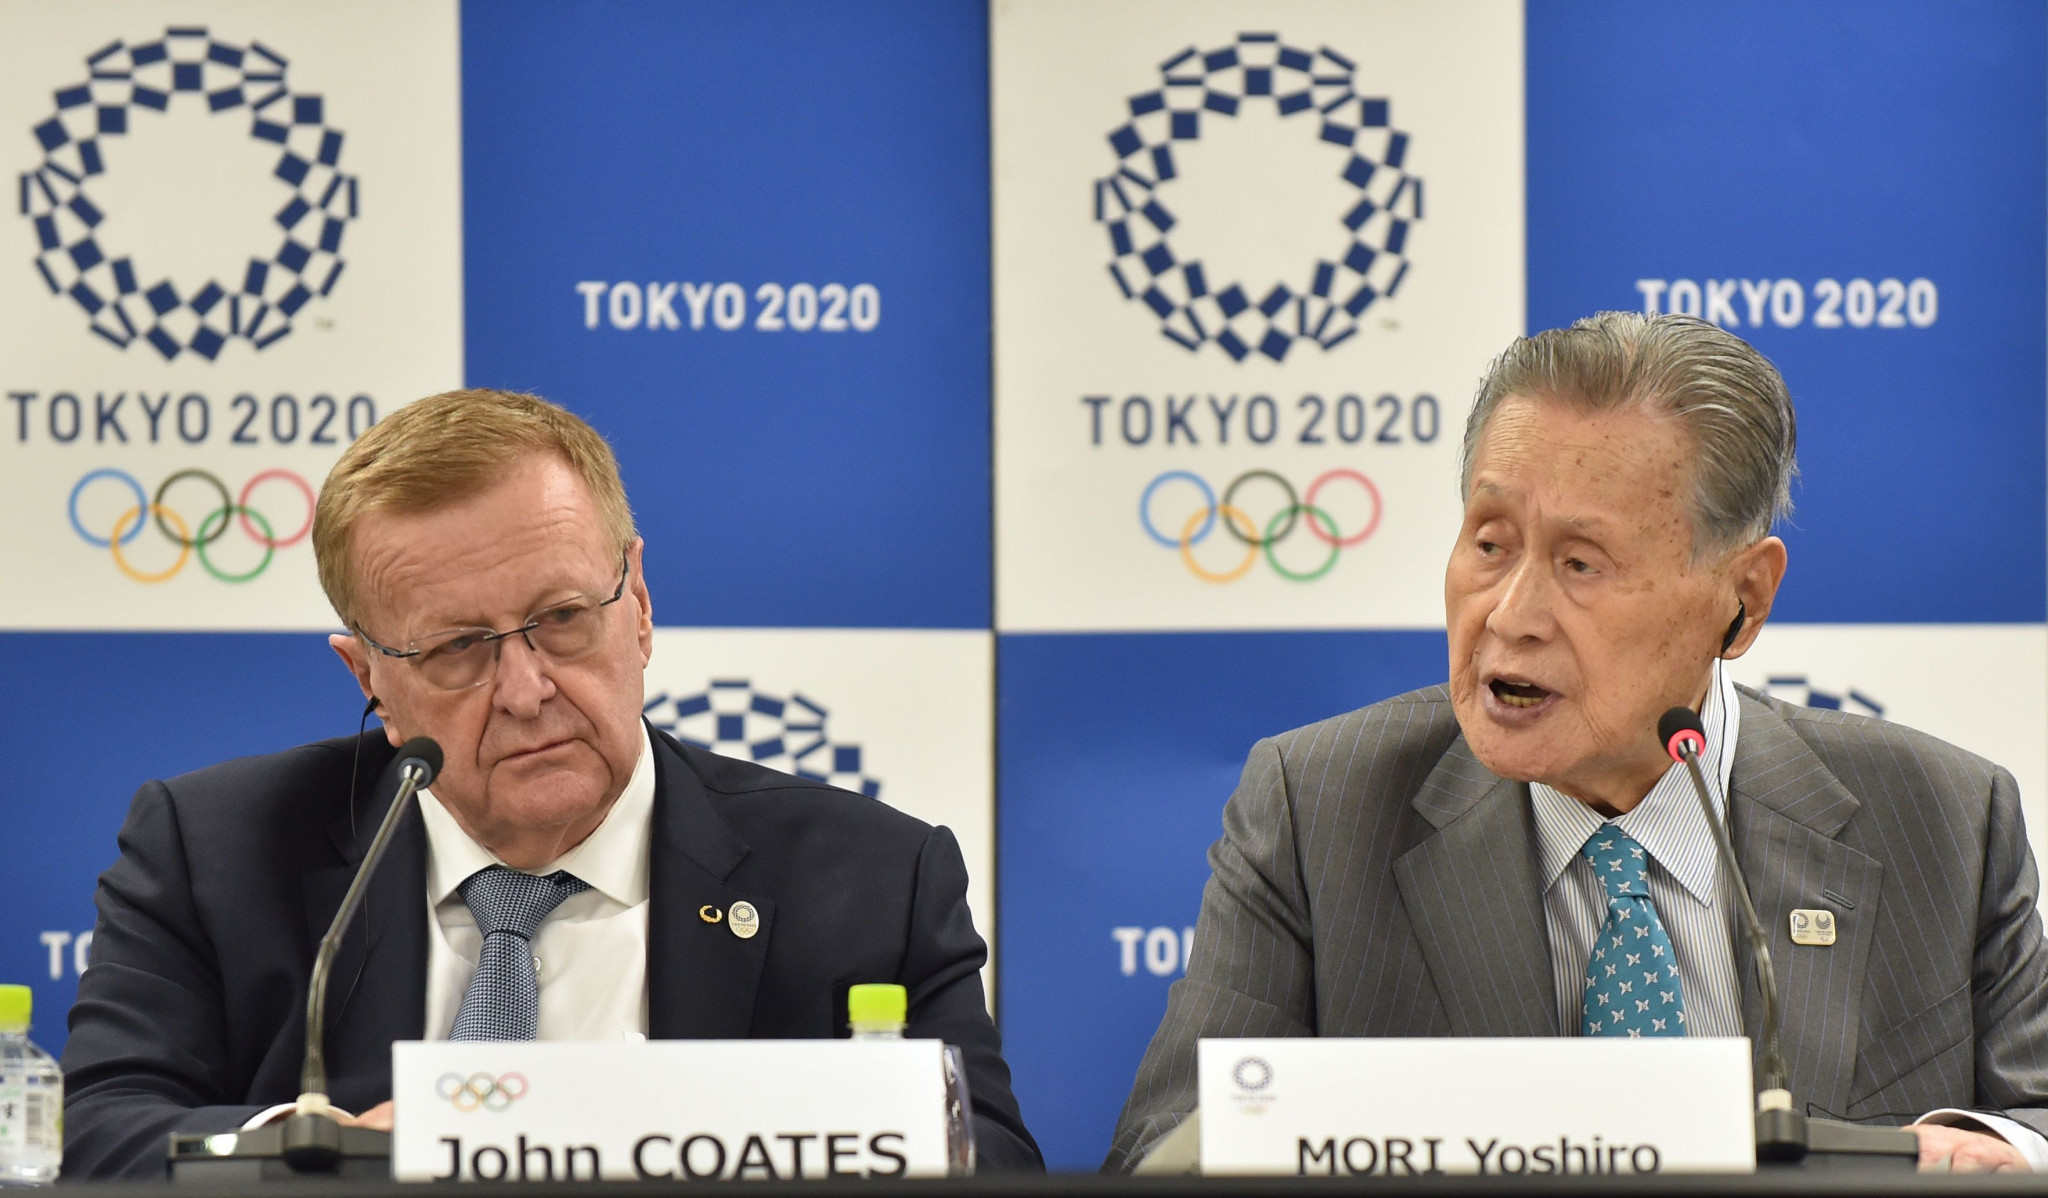 AOC President John Coates, left, has led the IOC Coordination Commission in Tokyo ©Getty Images